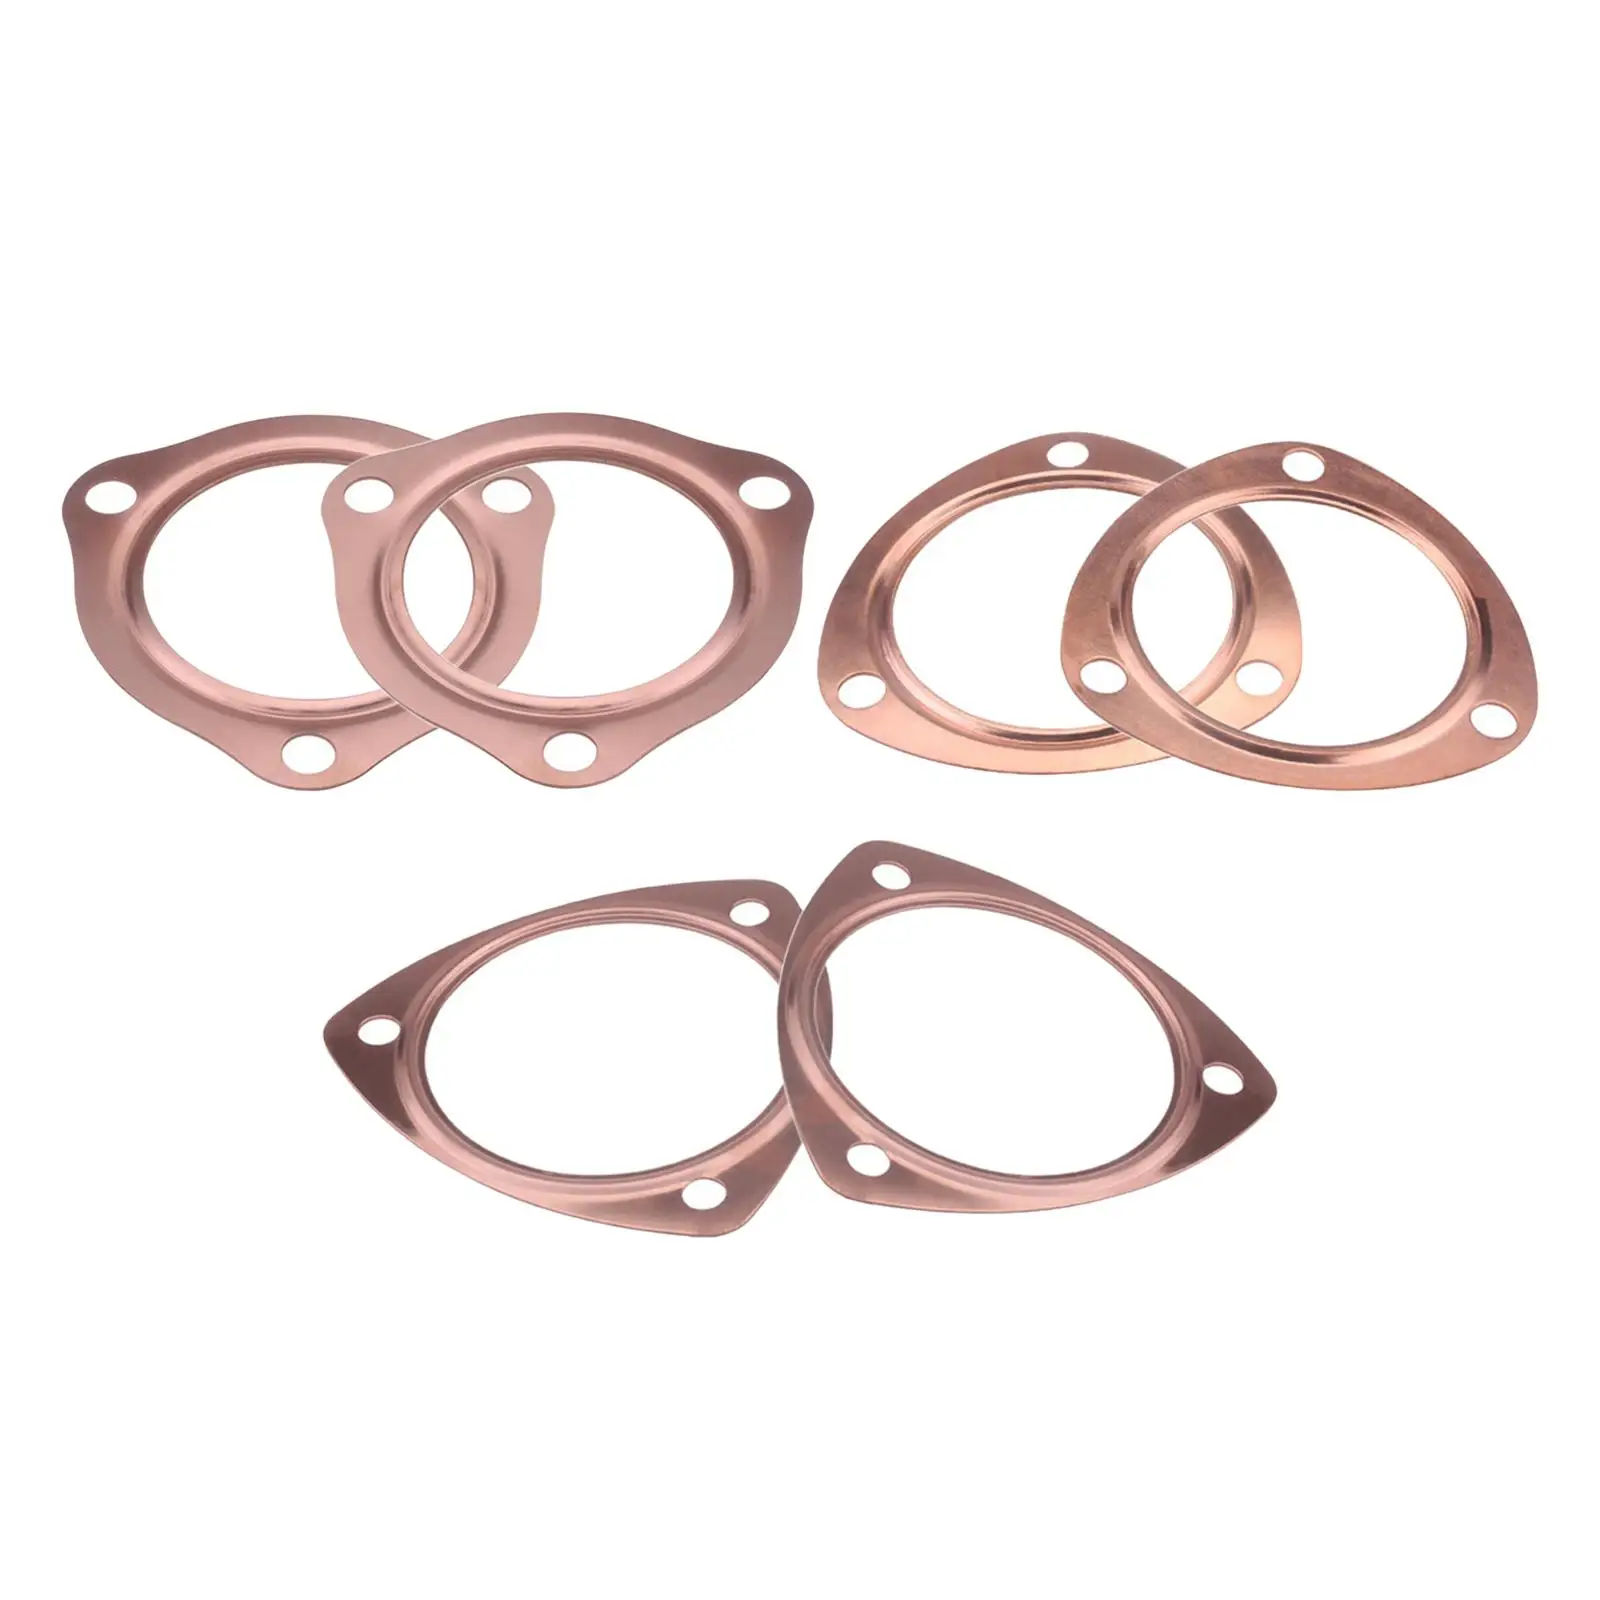 Copper Collector Gasket Copper Header Exhaust Collector Gaskets Wear Resisting for Sbc Bbc 302 350 454 Automotive Accessory